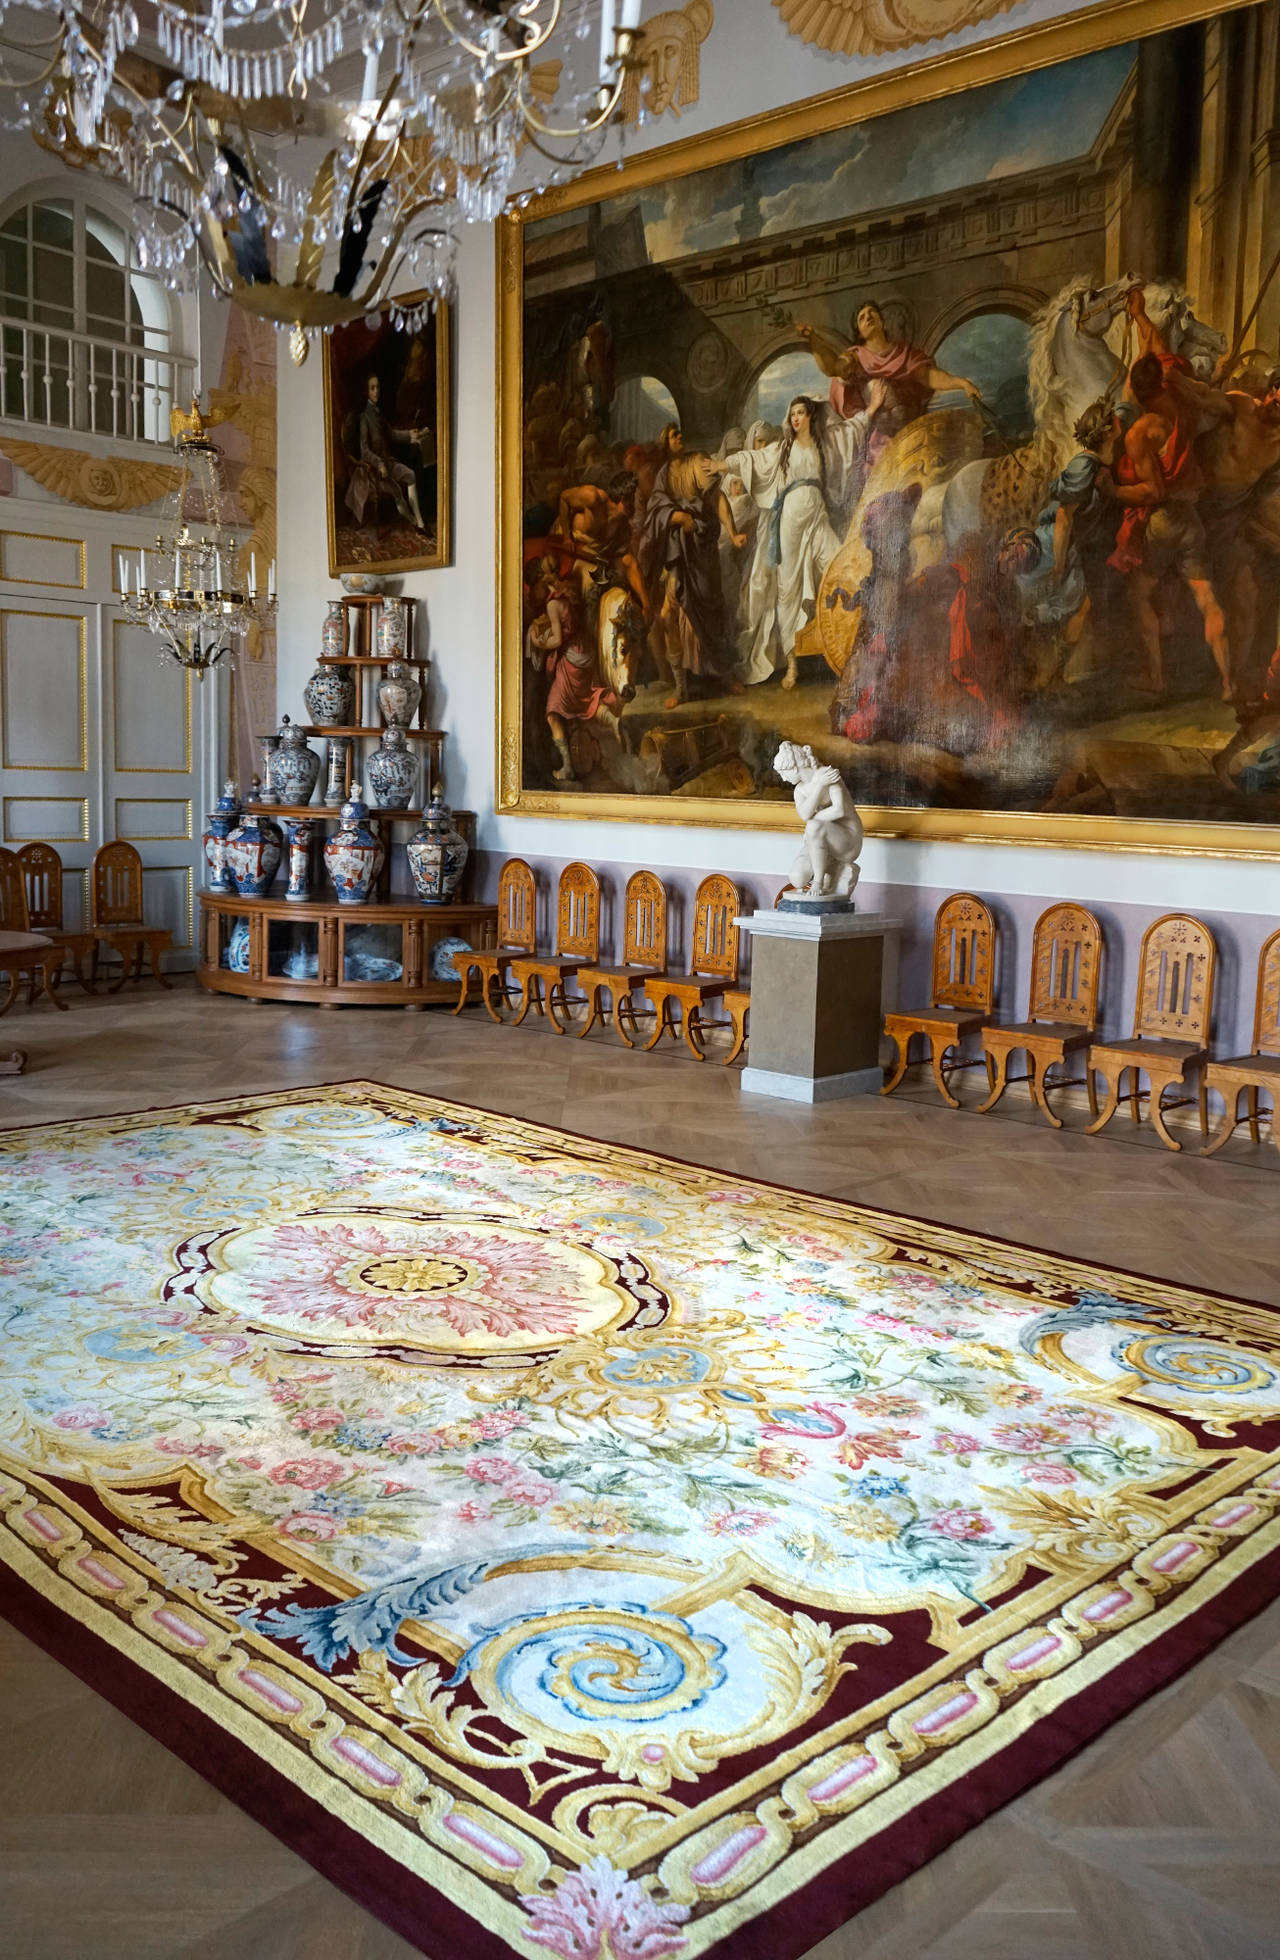 It is a refined and rare Savonnerie rug from the 19th century in perfect conditions.

Dimensions: 600 x 400 cm.
Composition: Wool.
Manufacture Royale de la Savonnerie
hand-knotted,
19th century.

The Savonnerie rugs played an important role